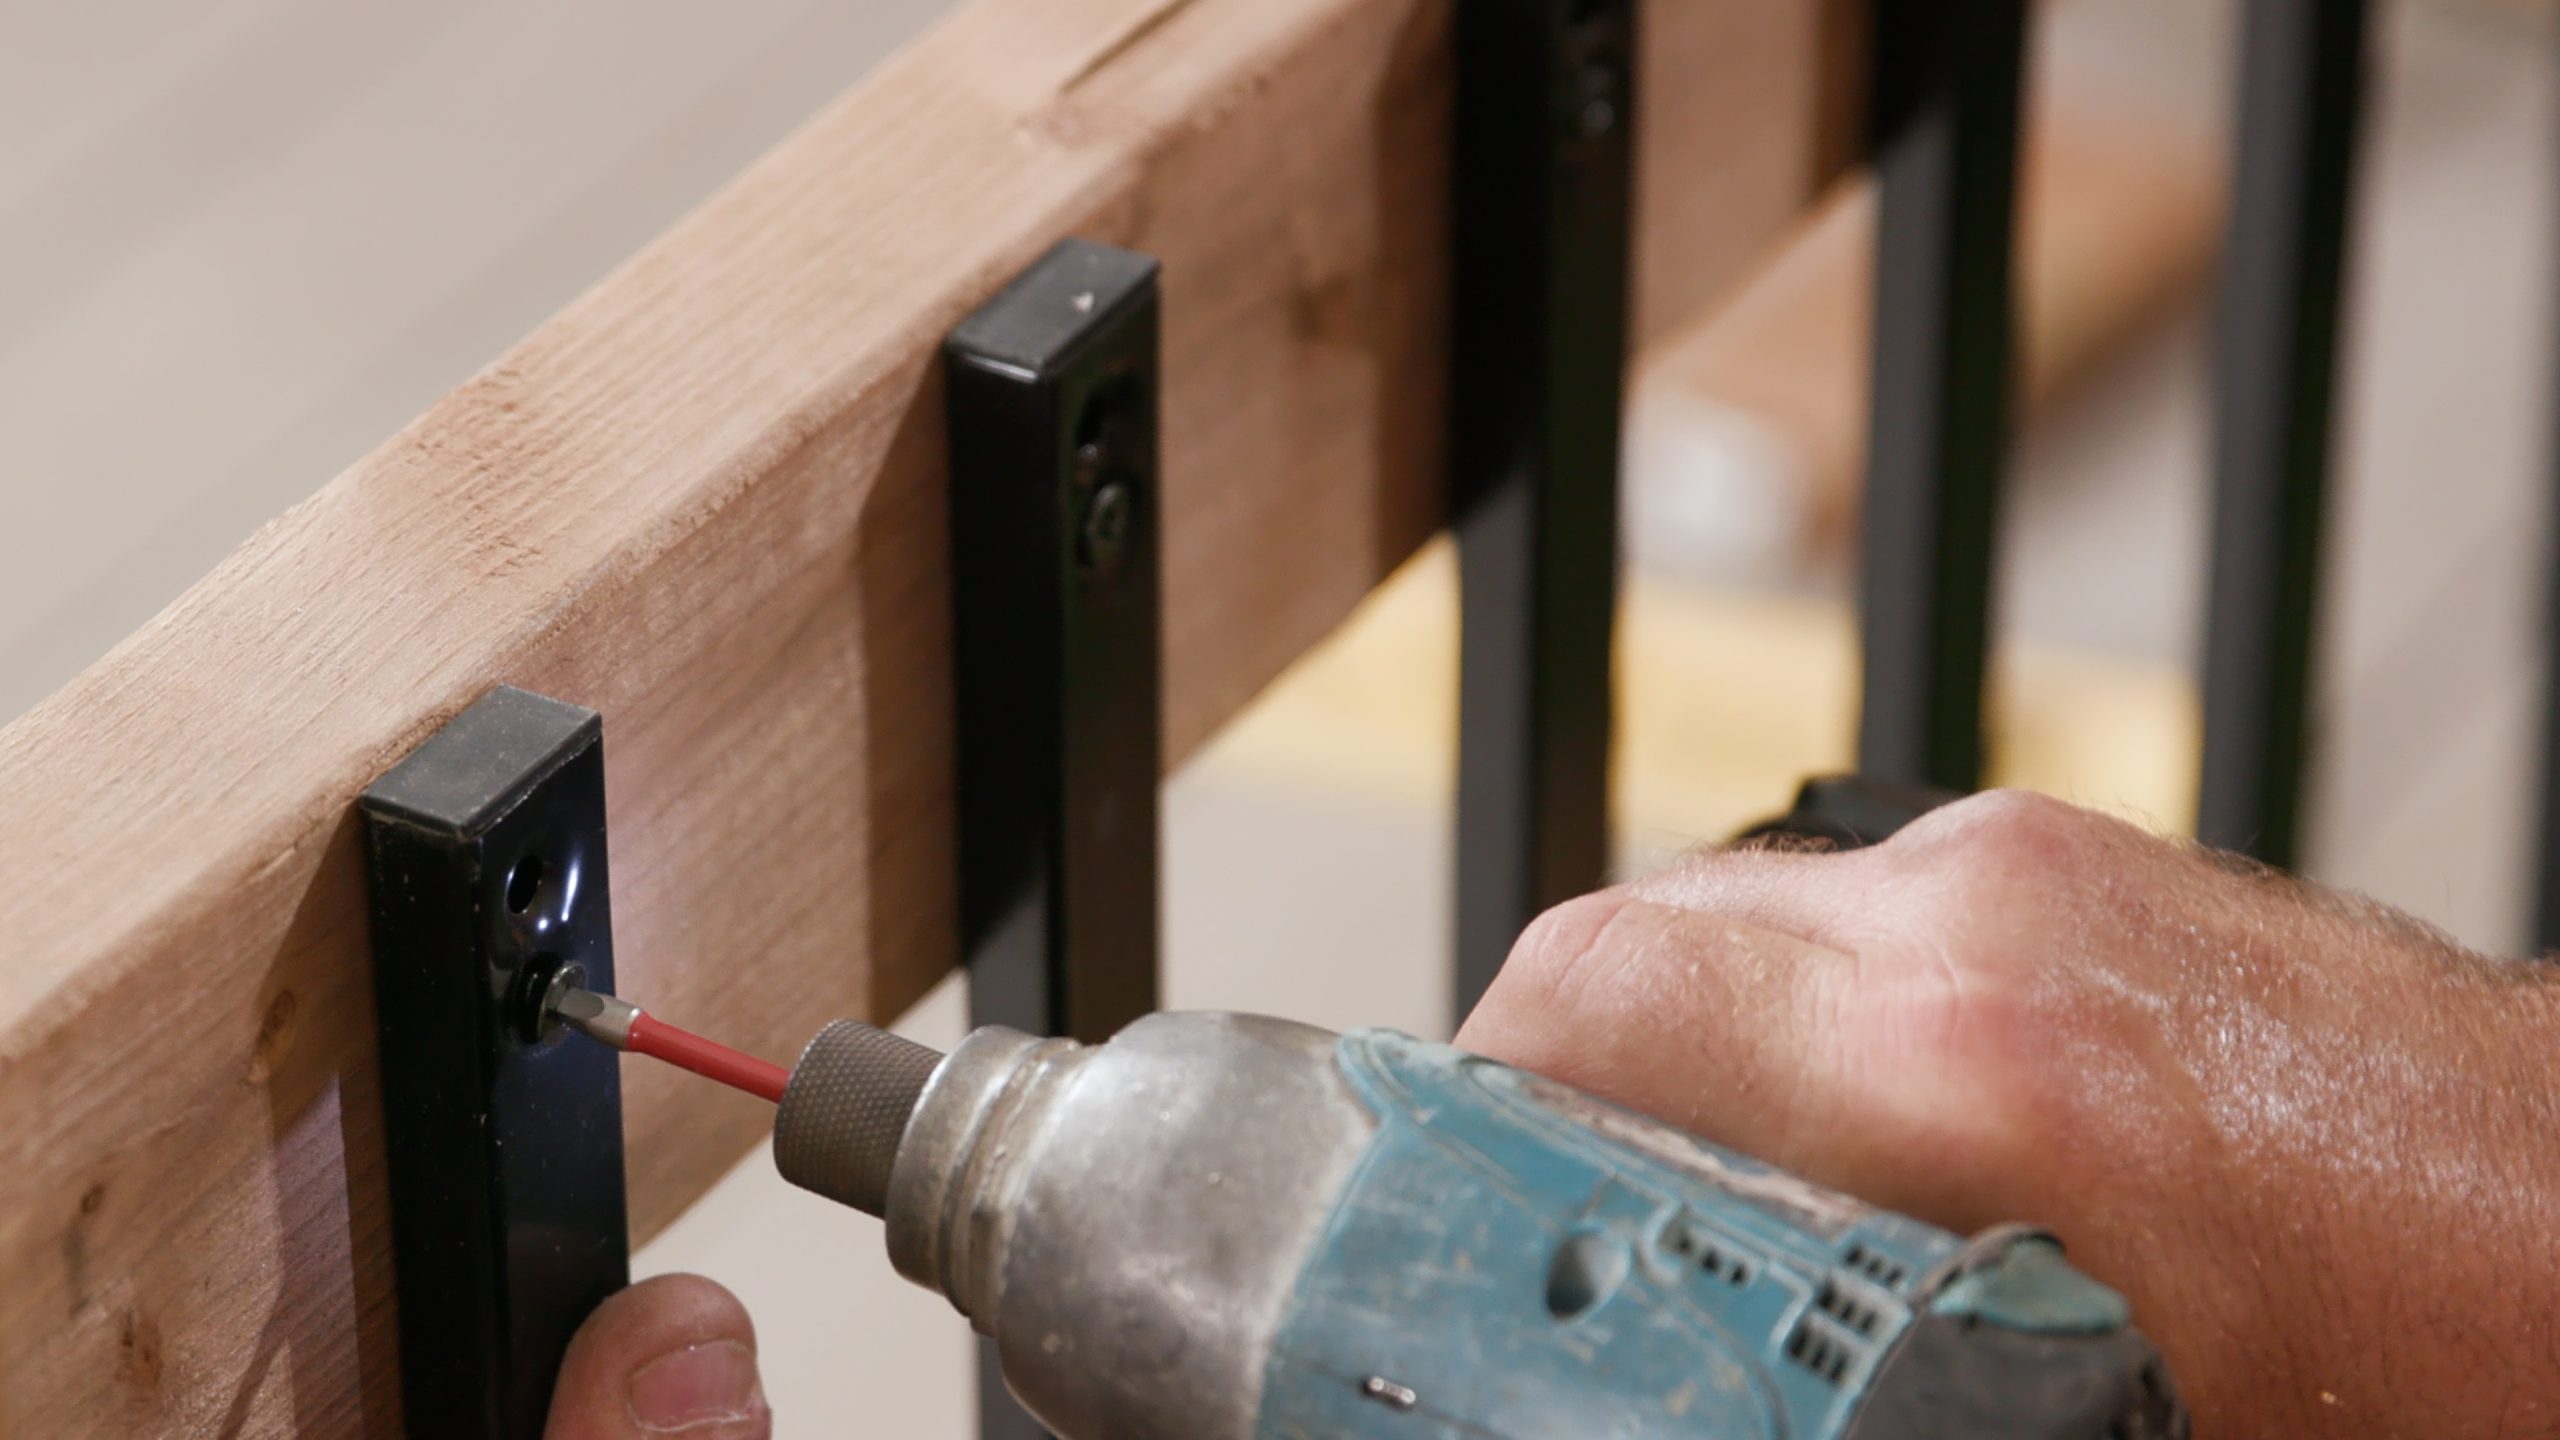 How-to Install: Rectangular Balusters for Deck Railings